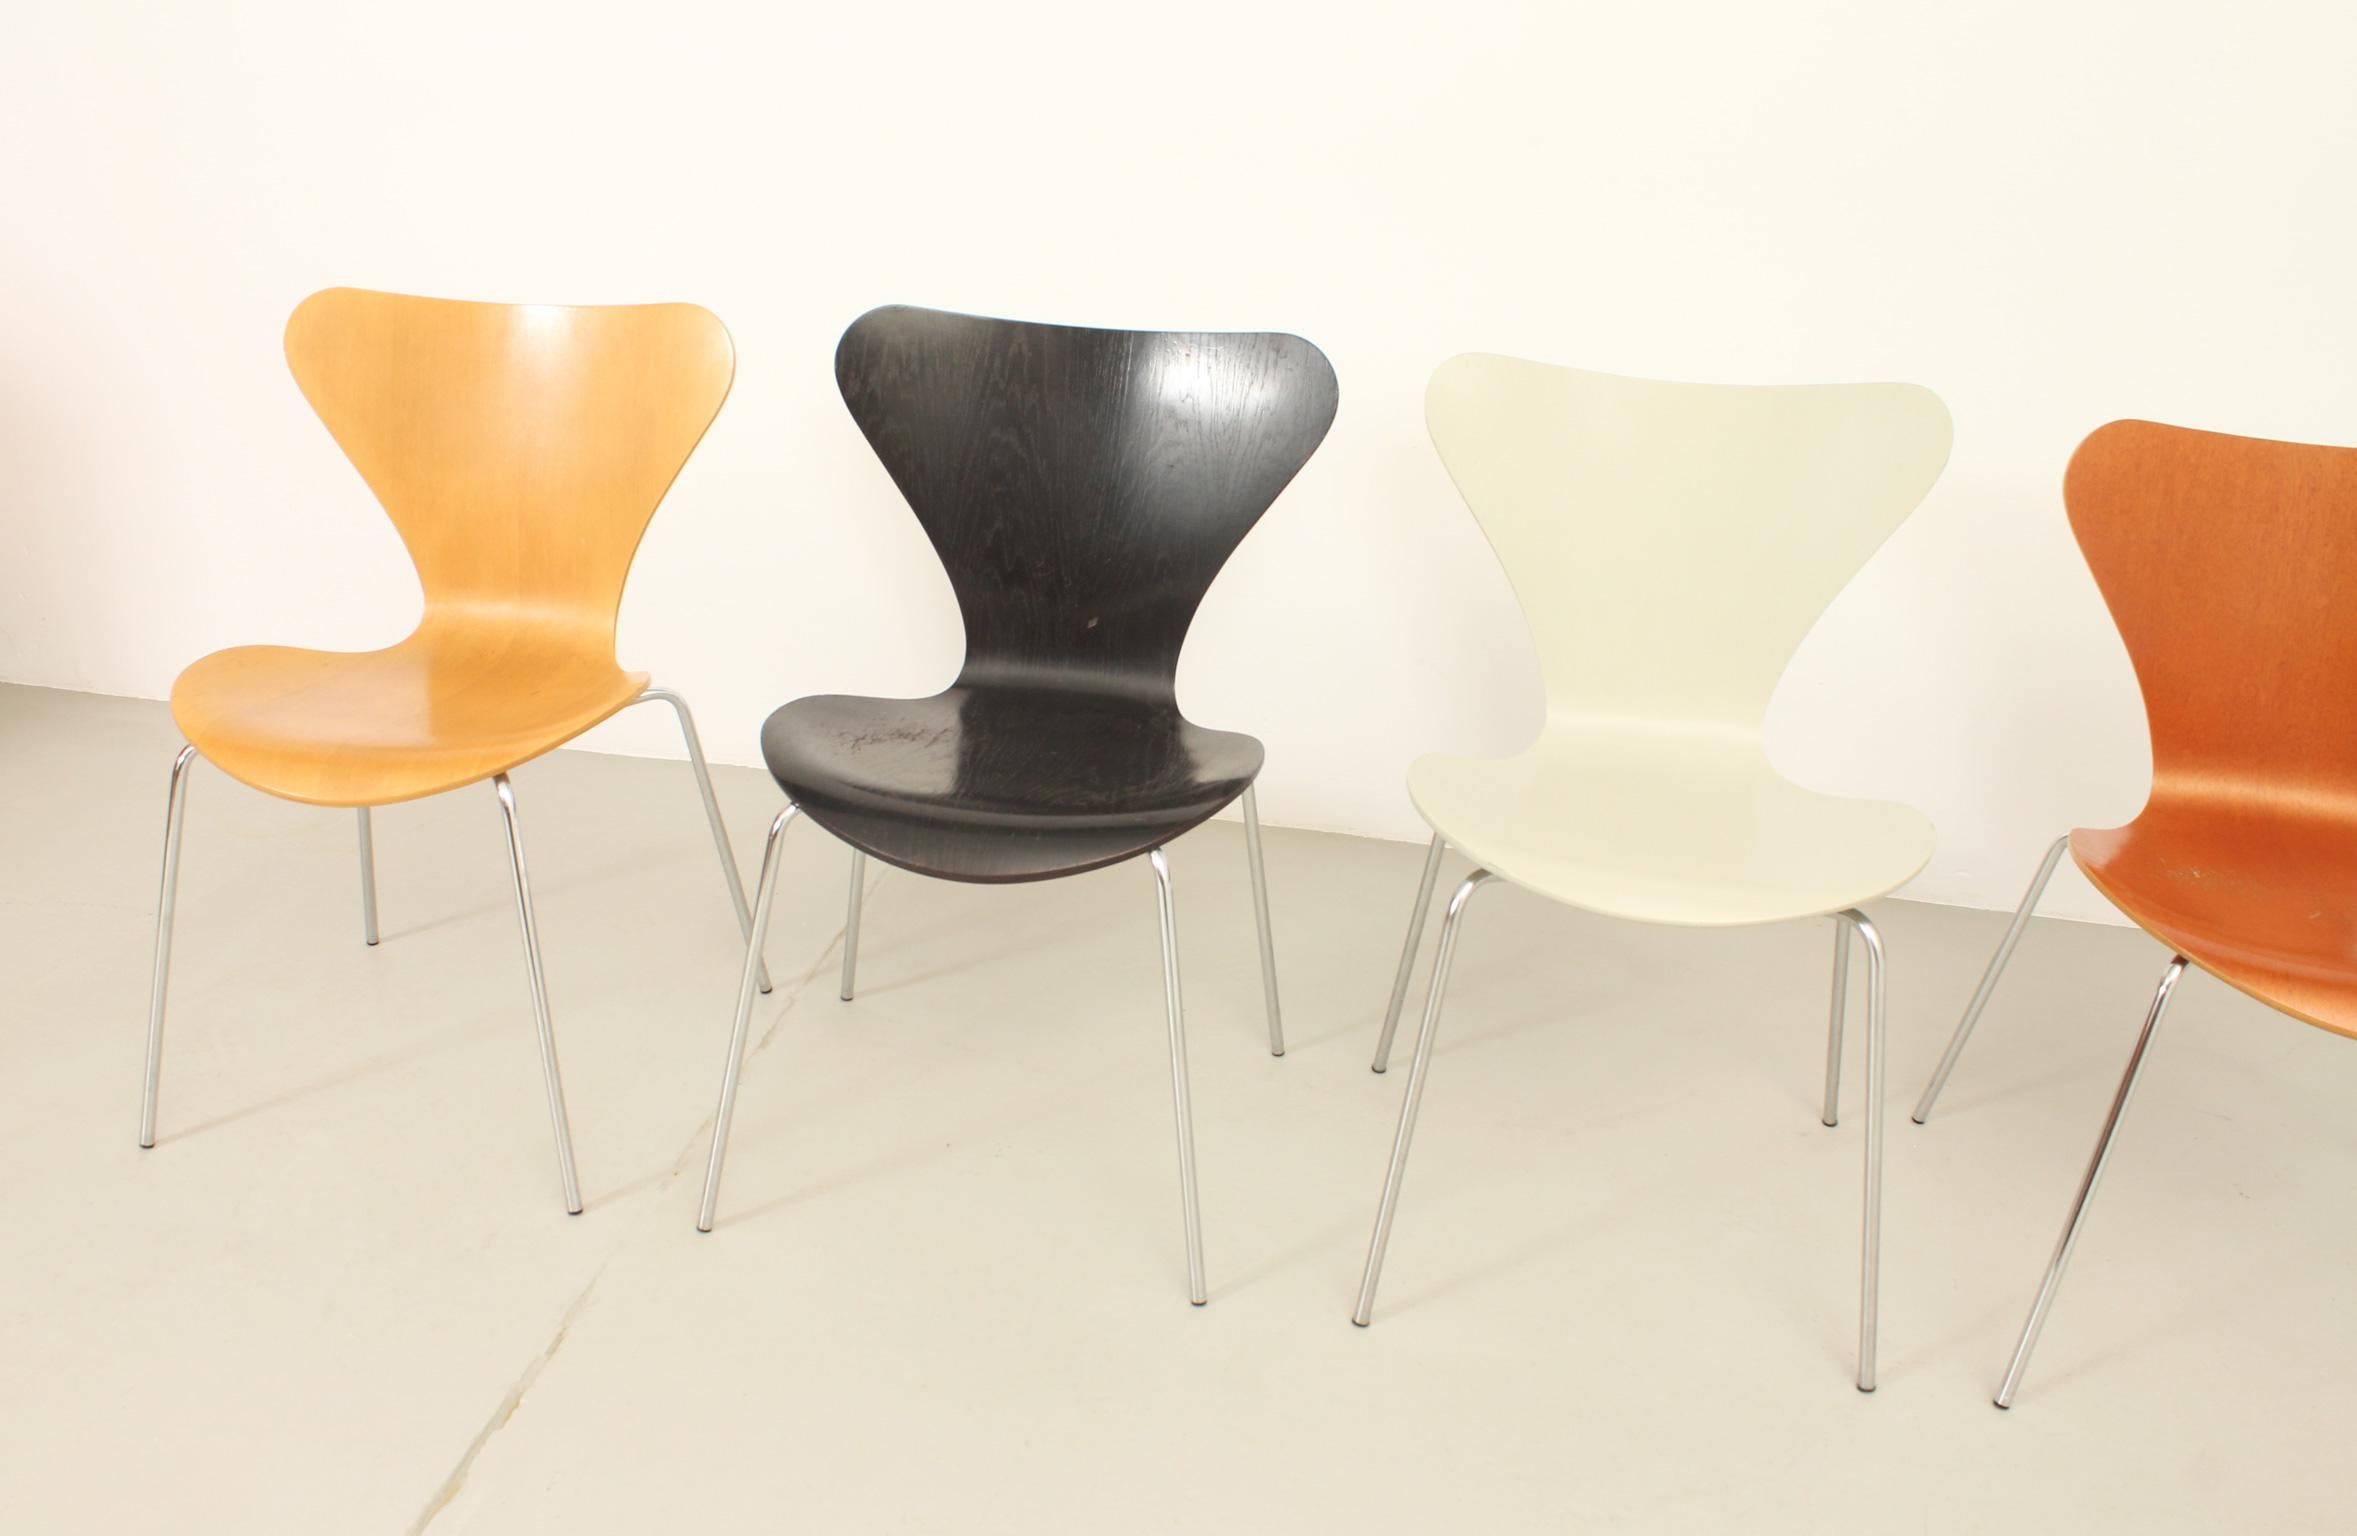 Late 20th Century Set of Five 3107 Chairs by Arne Jacobsen for Fritz Hansen